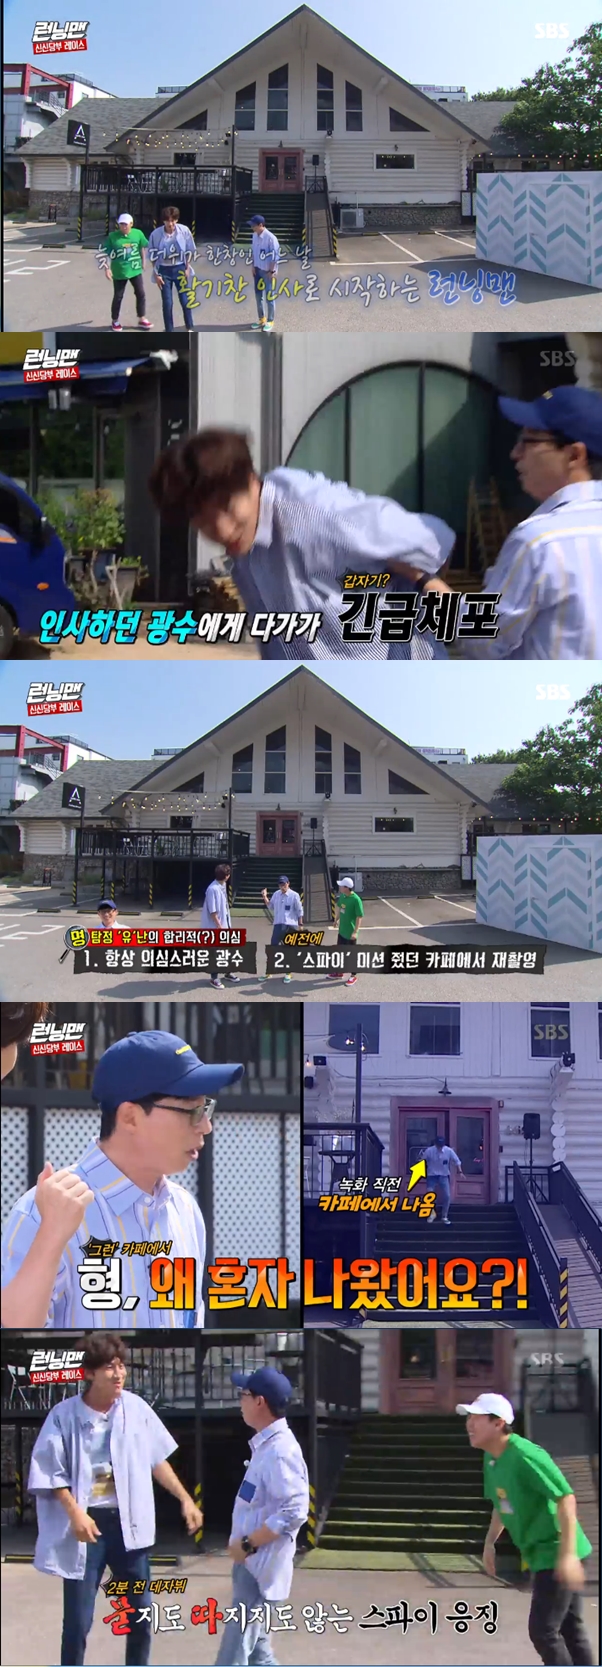 Yoo Jae-Suk and Lee Kwang-soo have doubted each other since the start.In the SBS entertainment program Running Man broadcasted on the afternoon of the afternoon, members were recording the opening in front of Cafe, which always plays Spy Race every time they record.Yoo Jae-Suk, who came down to see what he would see in the Cafe bathroom before the recording, grabbed Lee Kwang-soos neck walking in with Yang Se-chan.To the puzzled Lee Kwang-soo, Yoo Jae-Suk said youre Spy, which baffled him.When I recorded it in this Cafe, there was always Spy, he added, adding that he had his doubts.Yang Se-chan, who was listening quietly, told Yoo Jae-Suk, Why do you come out of Cafe?Without missing this, Lee Kwang-soo broke the arm of Yoo Jae-Suk and laughed back as You Spy.On the other hand, the production team showed the members own good, and Haha handed the album to the members when he was in a hip-hop sensibility.Haha was embarrassed by the sudden action of the production team, but eventually the music was broken. After listening to the music, Haha said, I do not know what to do with the recording today.Yoo Jae-Suk laughed, saying, Just stay still.